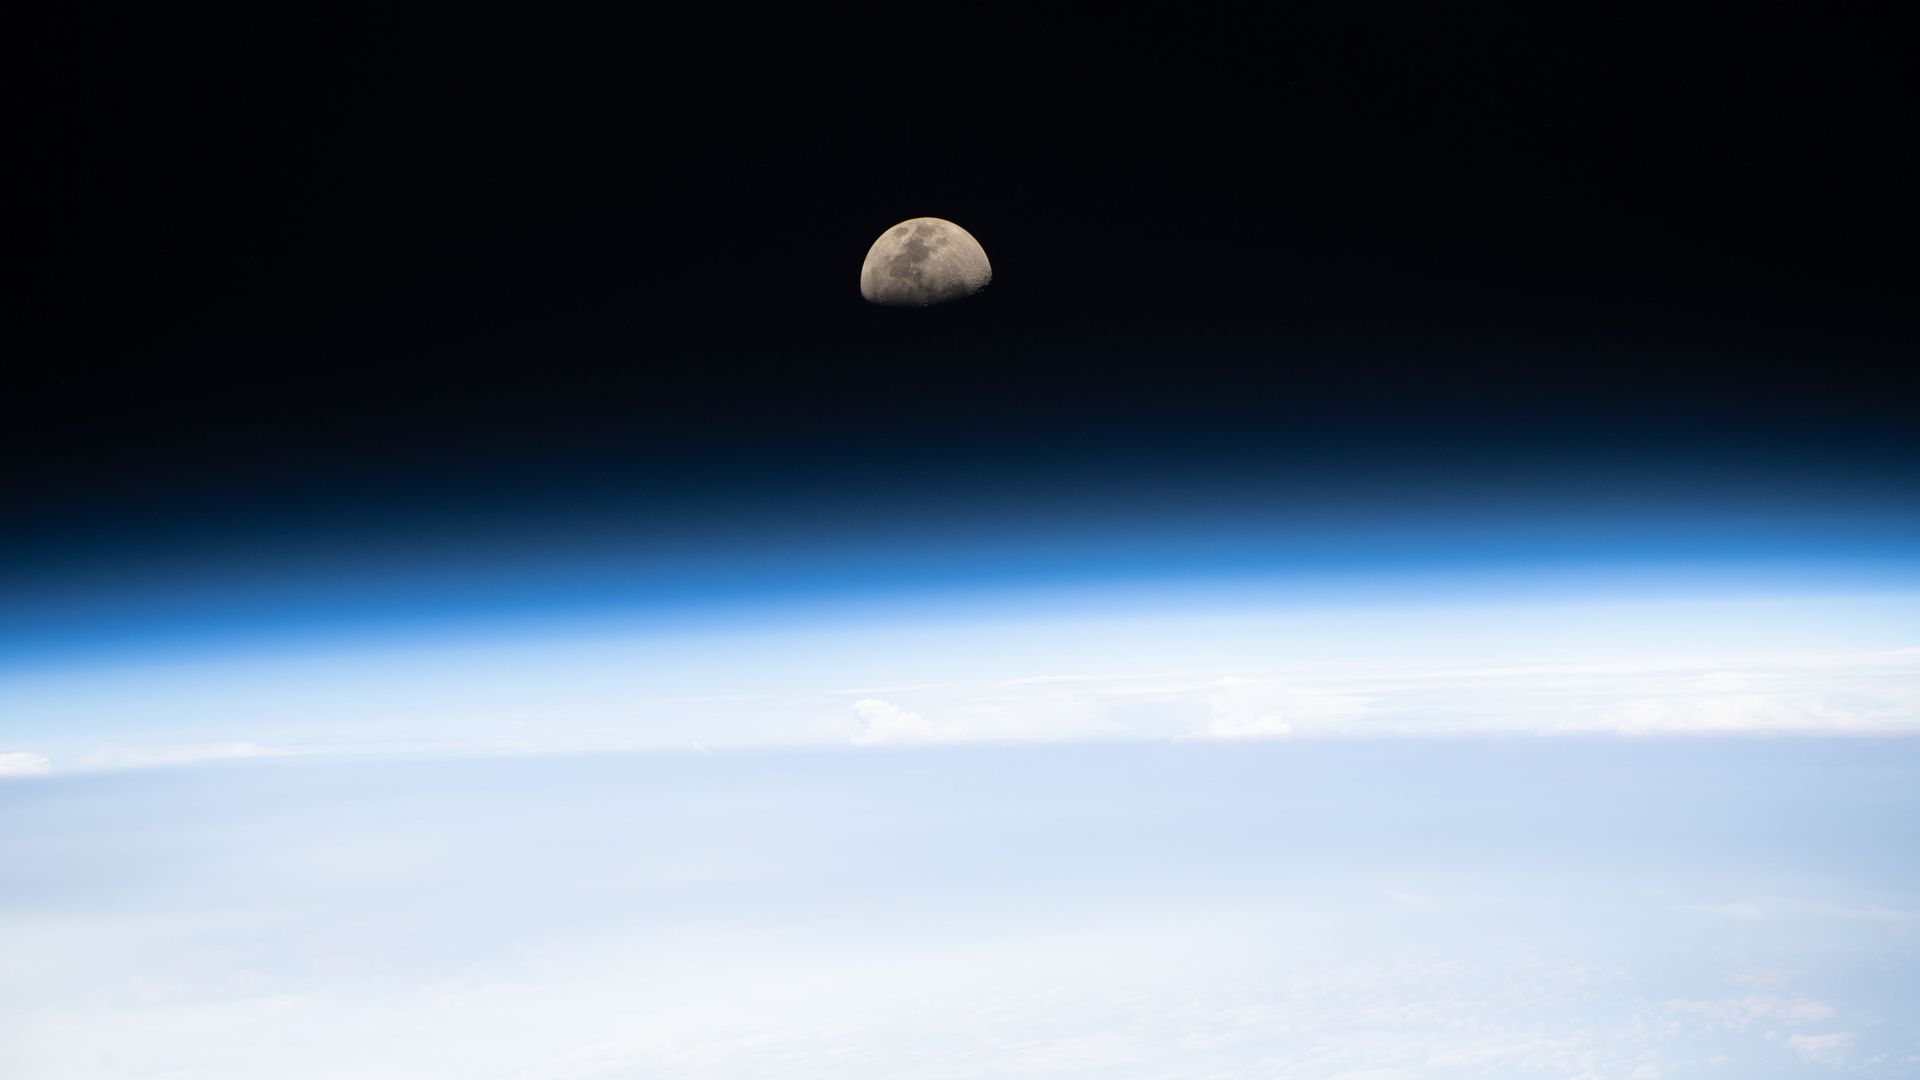 The Moon seen above the Earth from the International Space Station